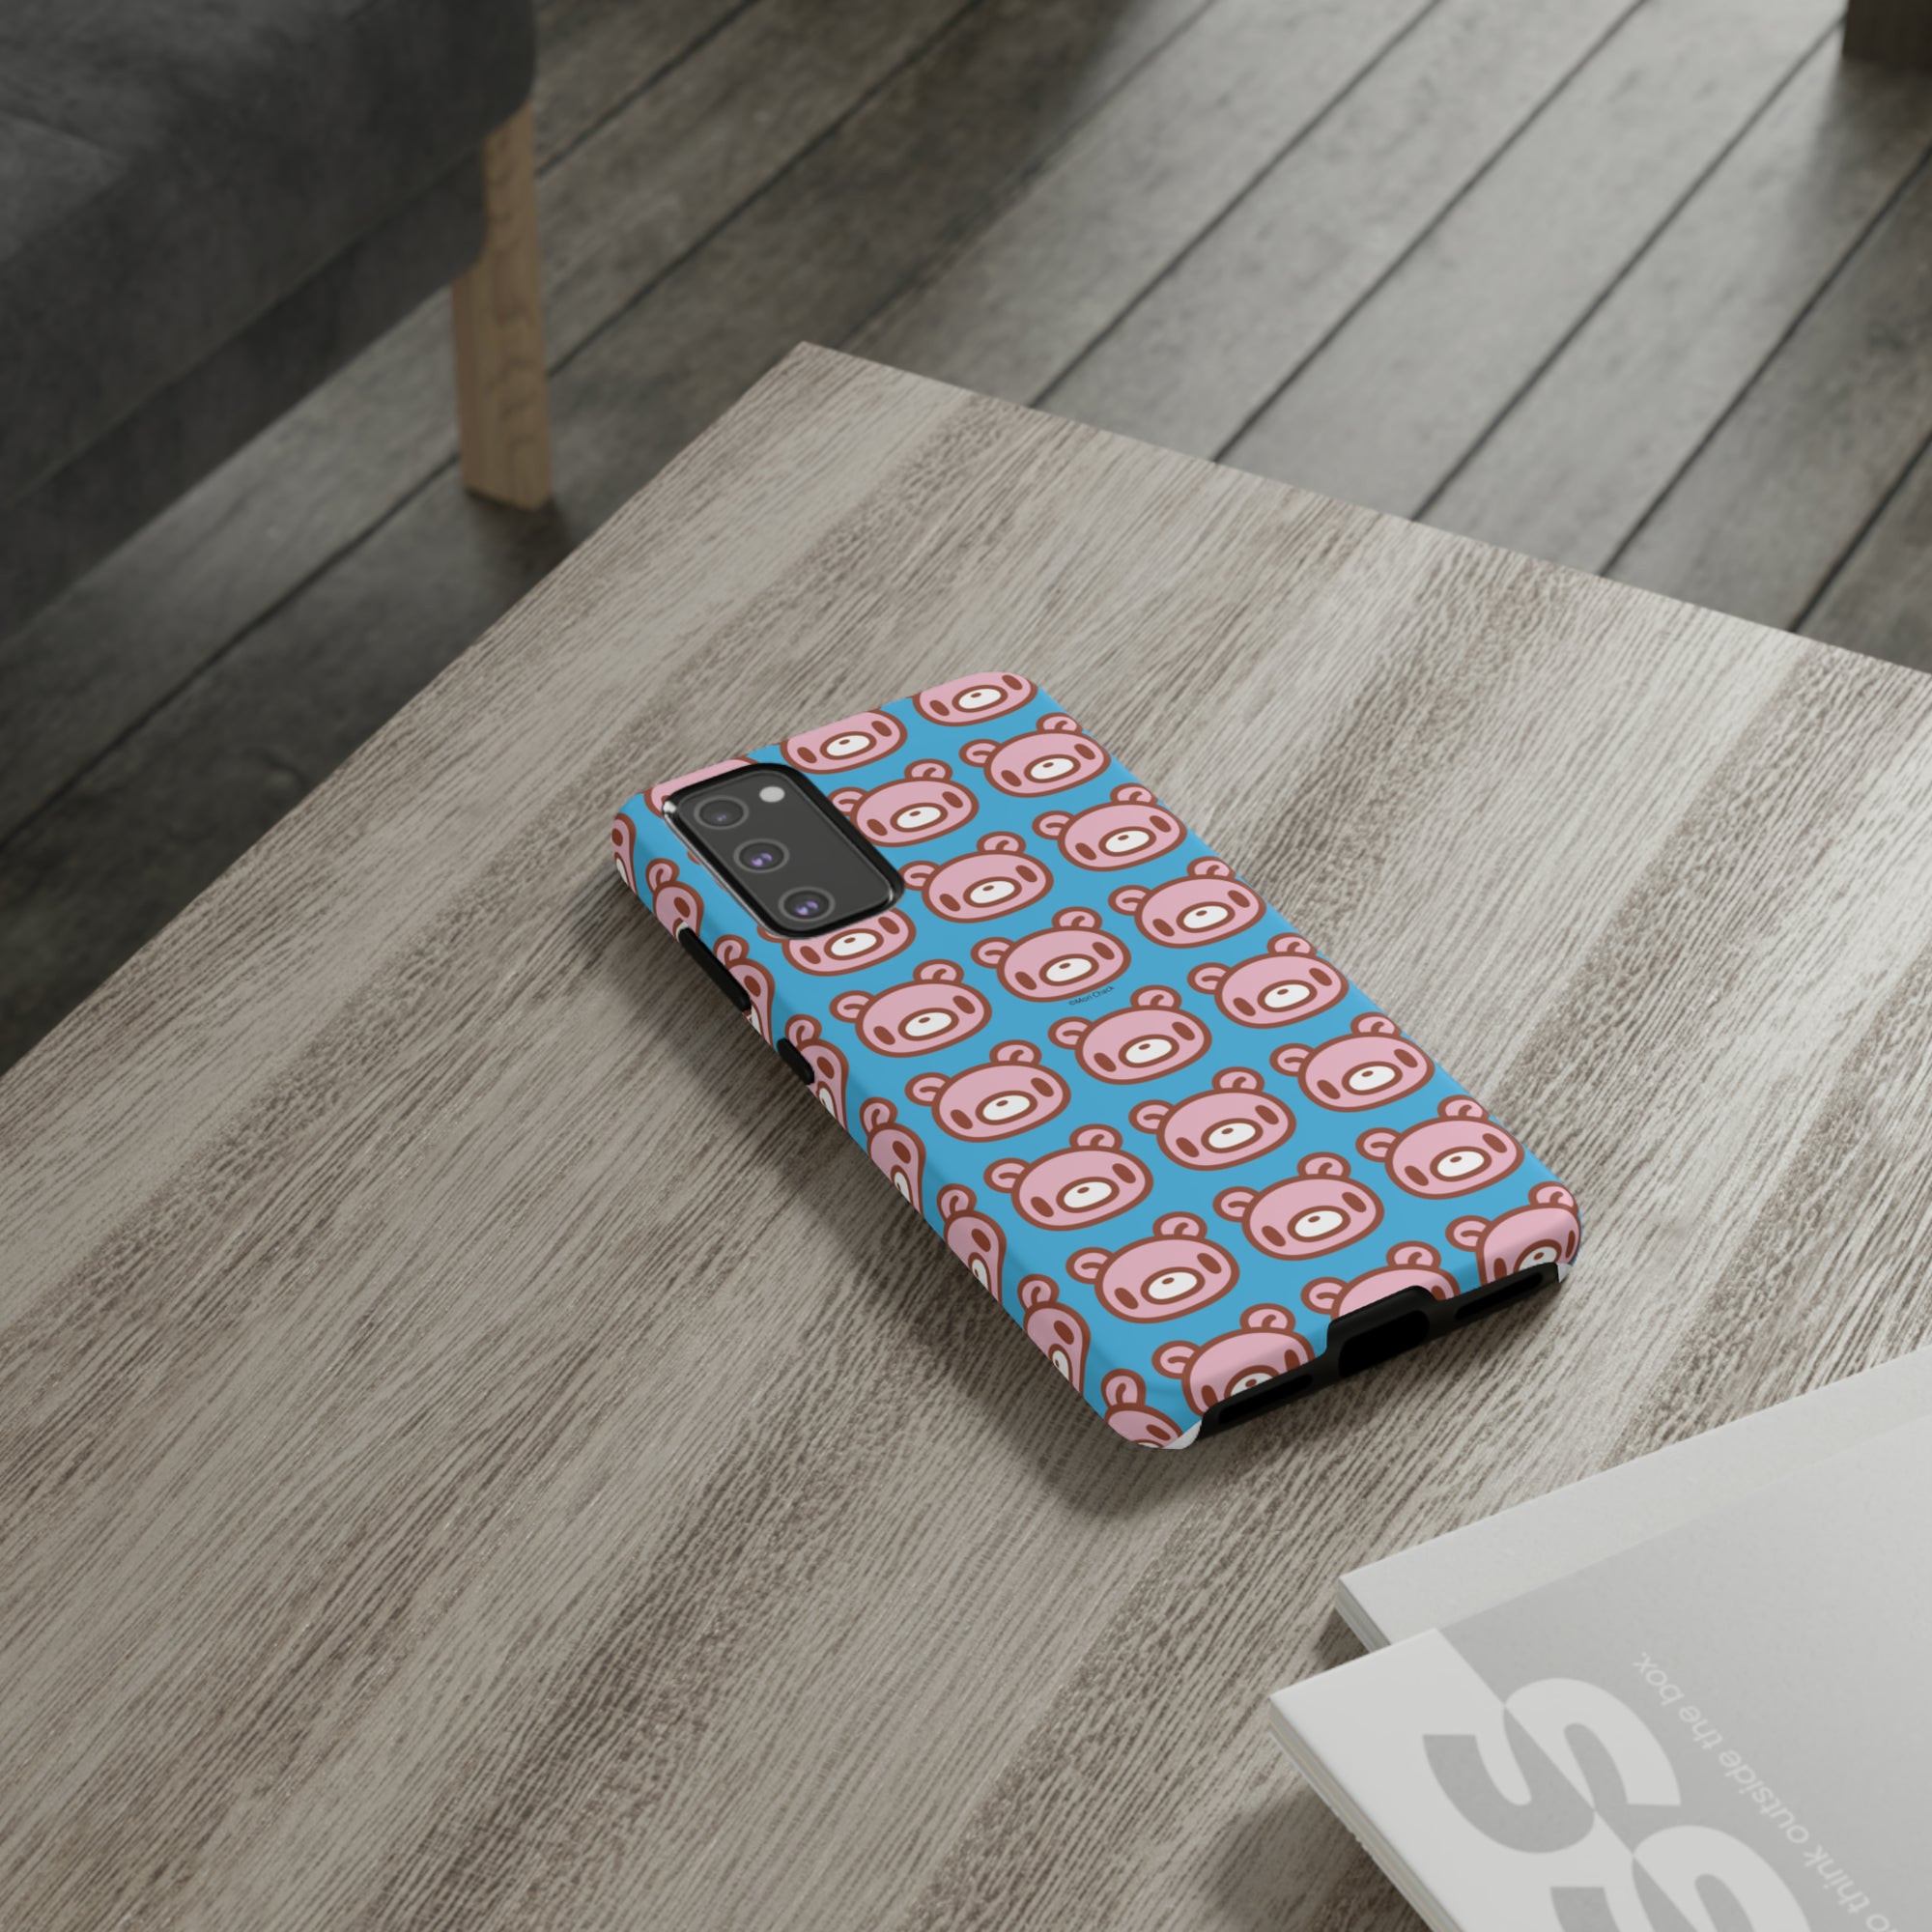 ADORABLE GLOOMY - Updated Tough Phone Case